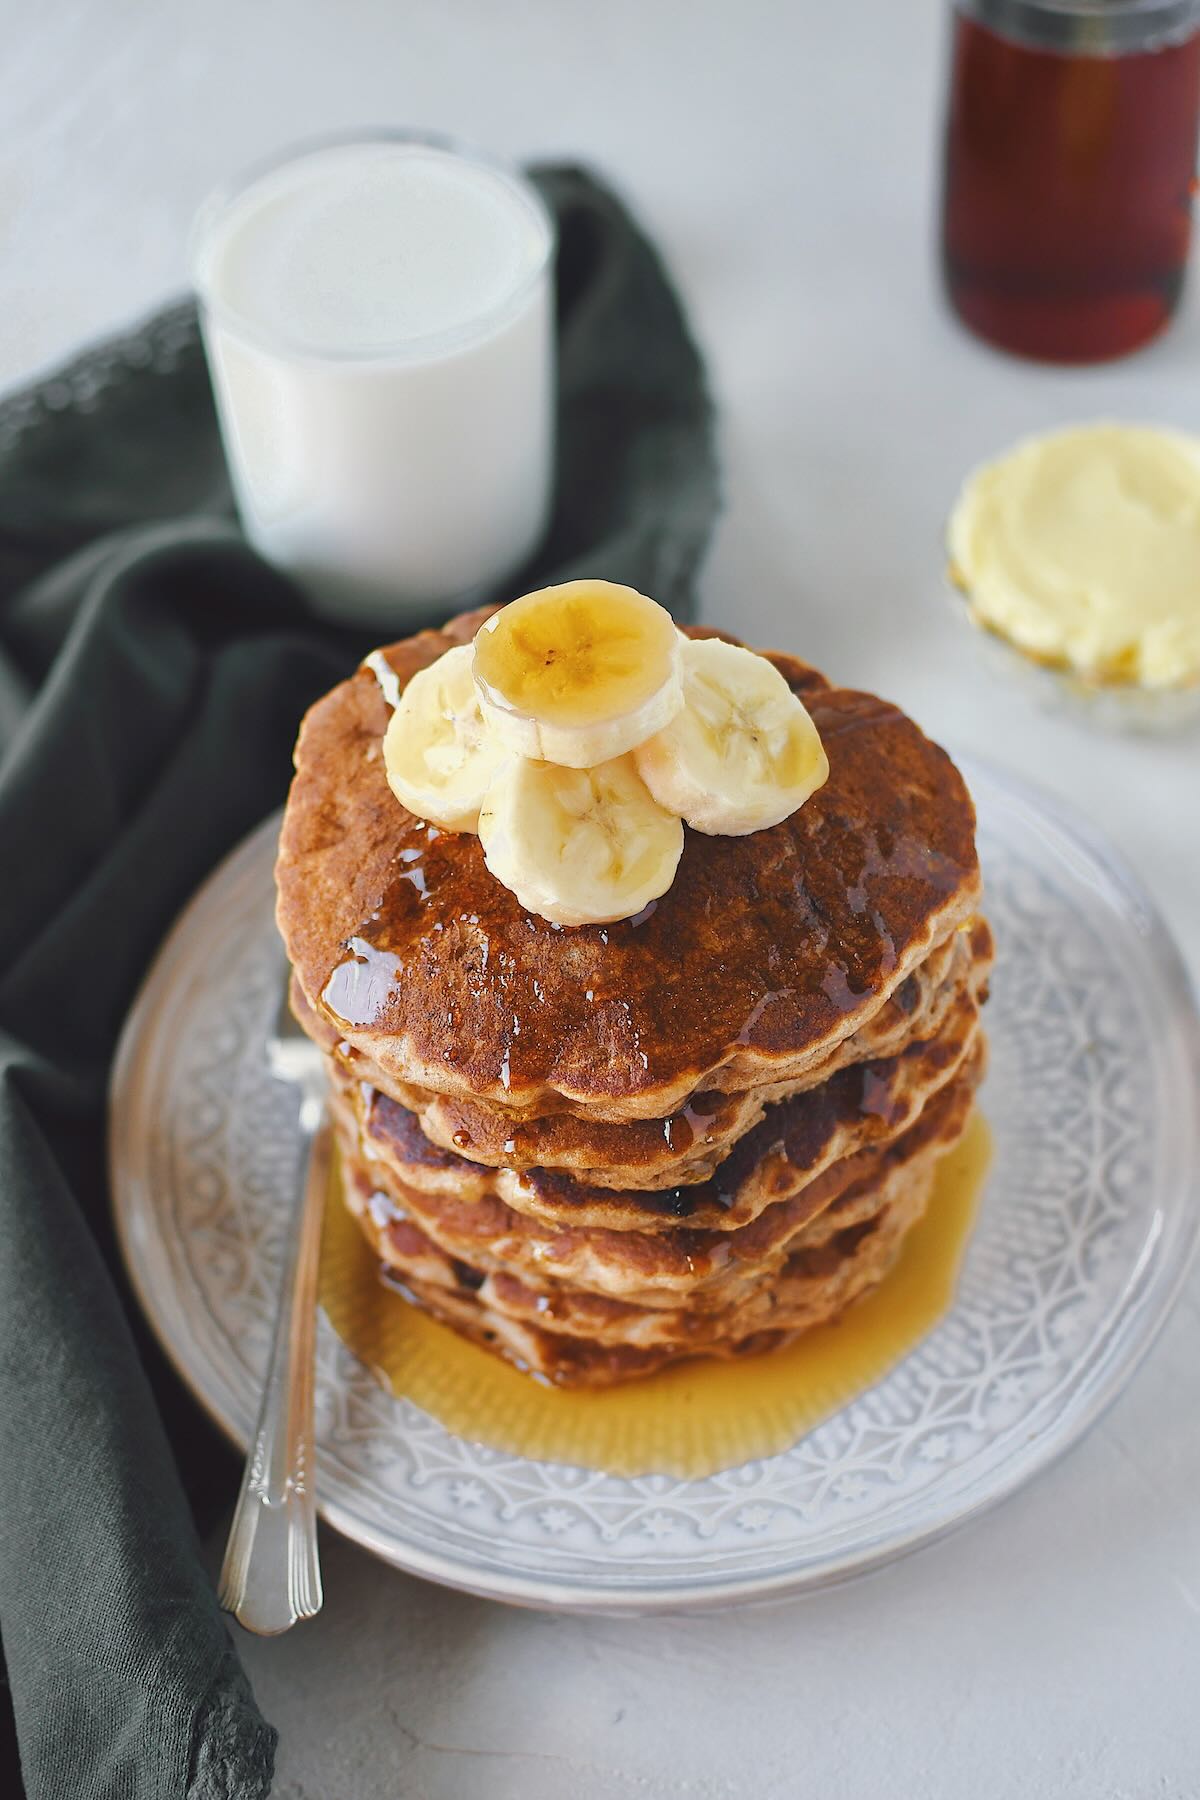 Banana Pancakes stacked high, topped with fresh banana slices, and drenched in maple syrup.